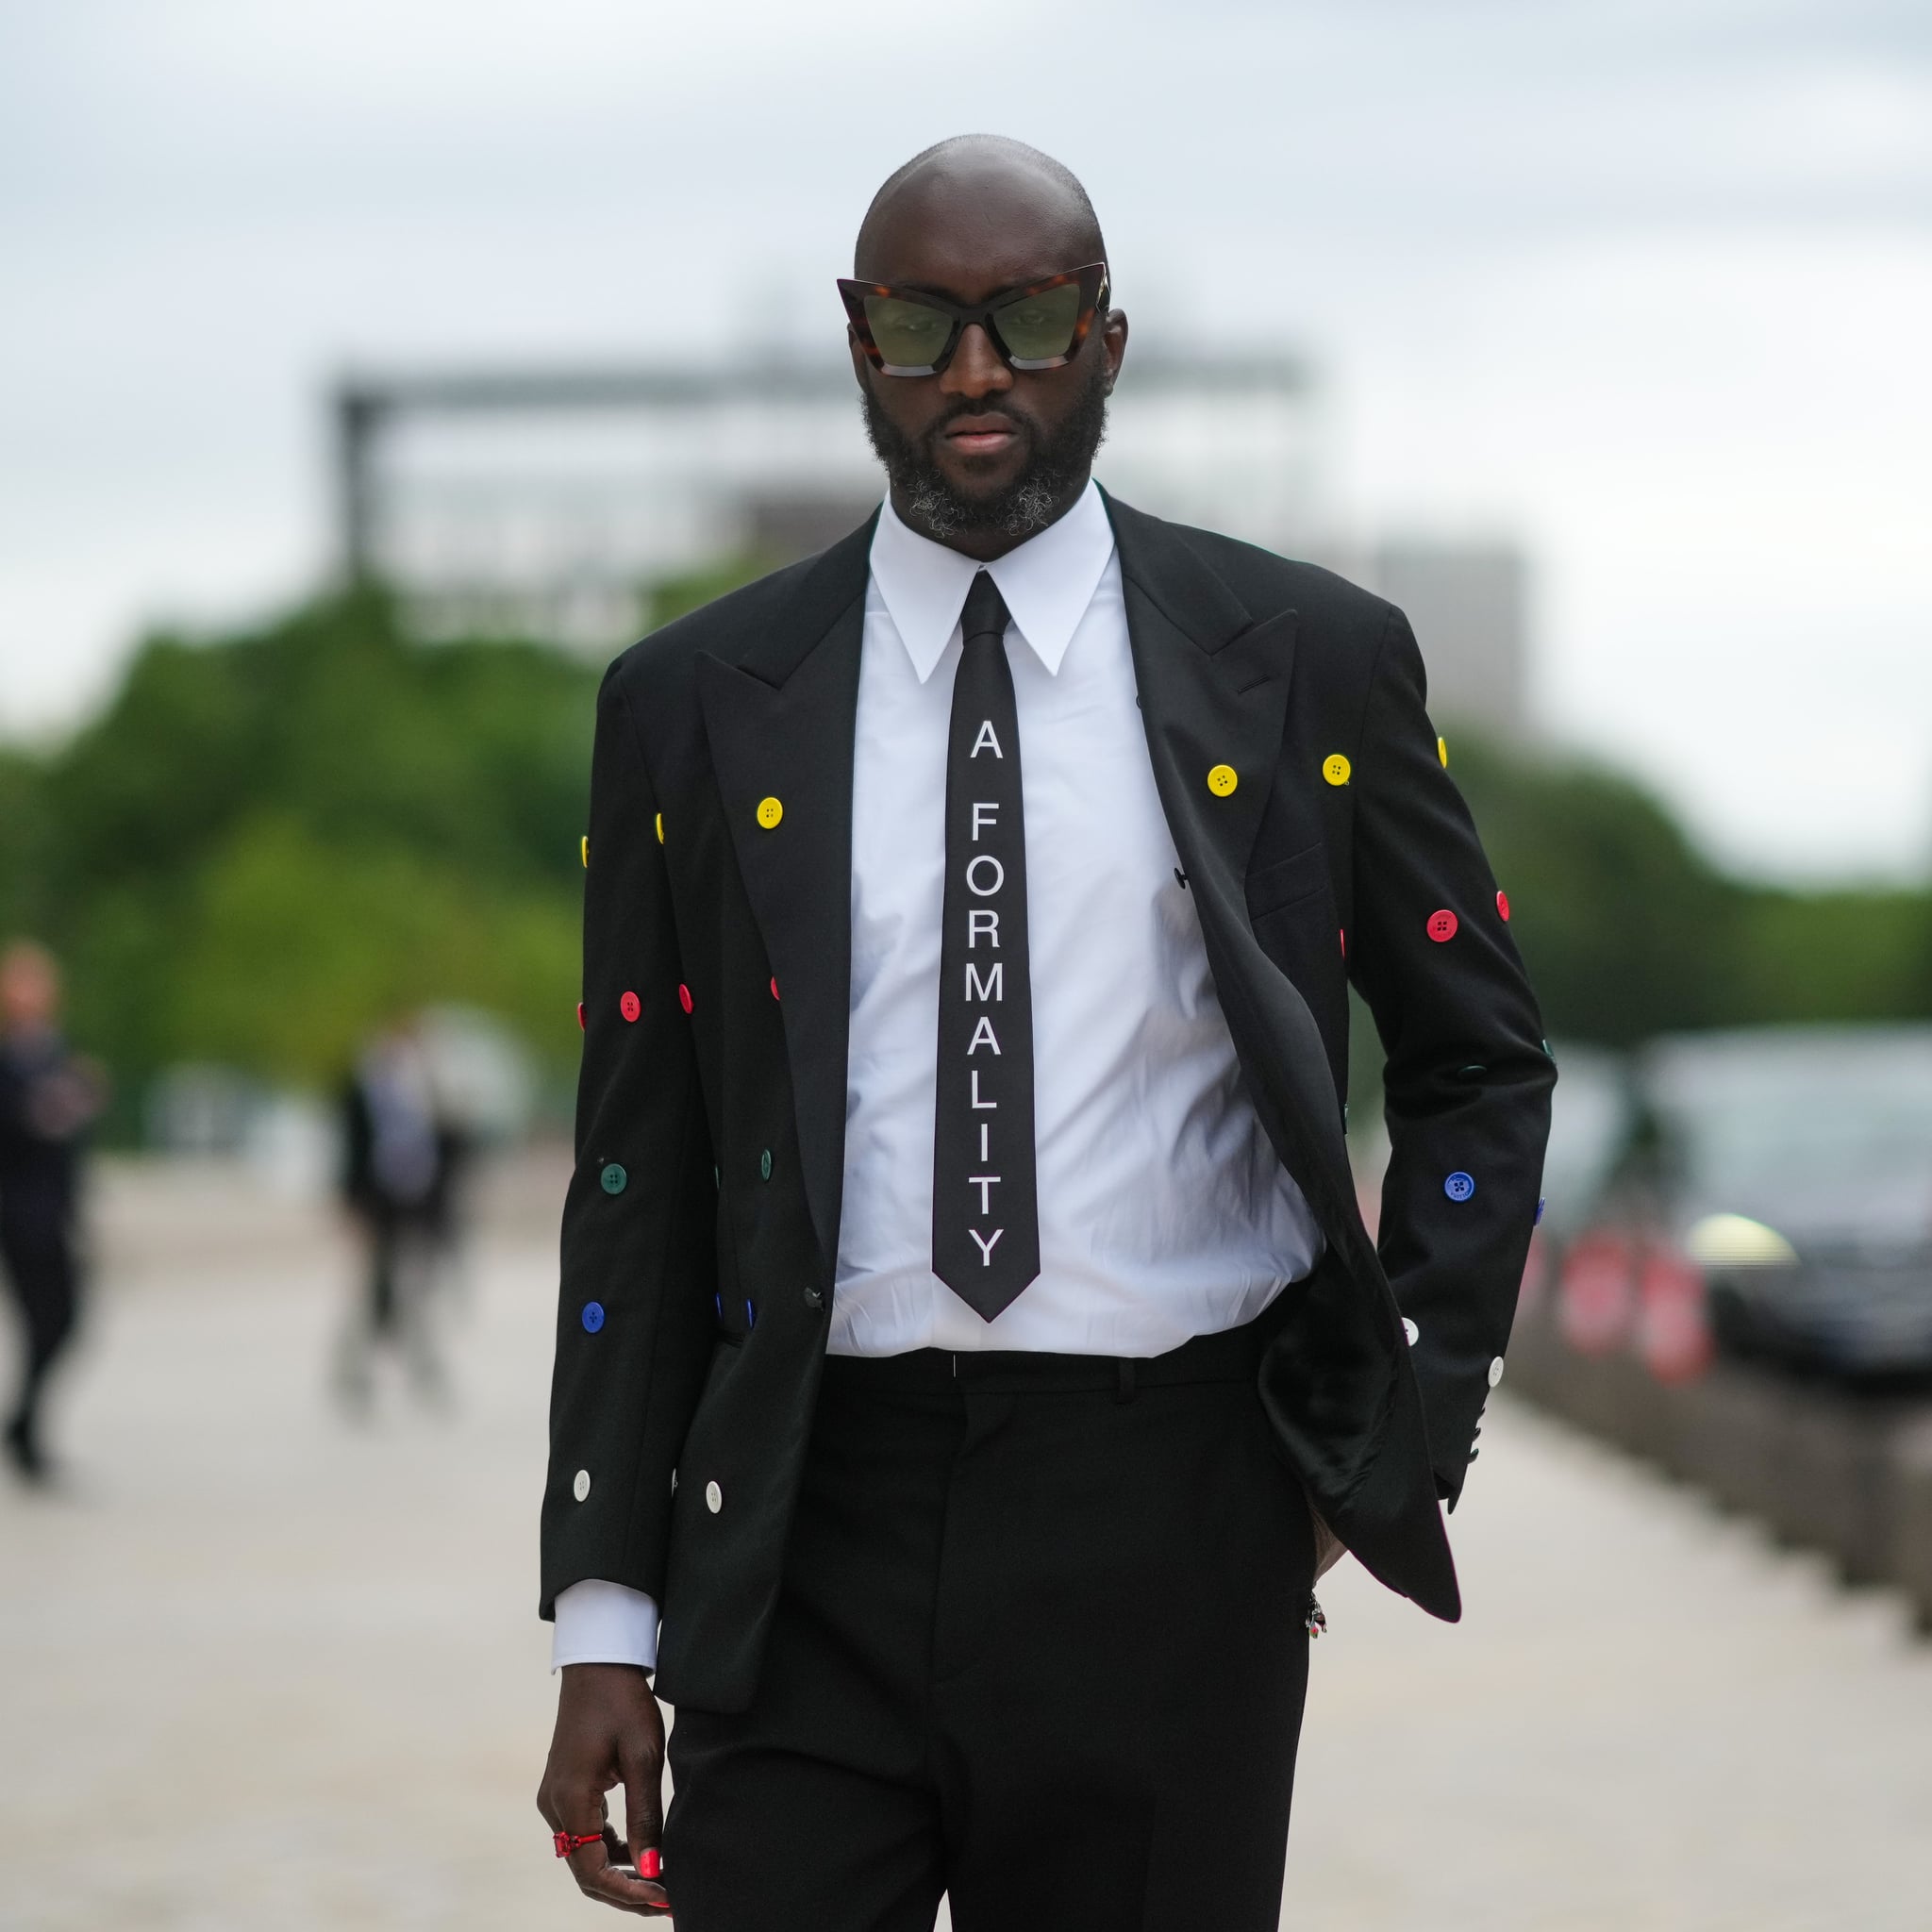 Fans Are Outraged the Grammys Called Virgil Abloh a Hip-Hop